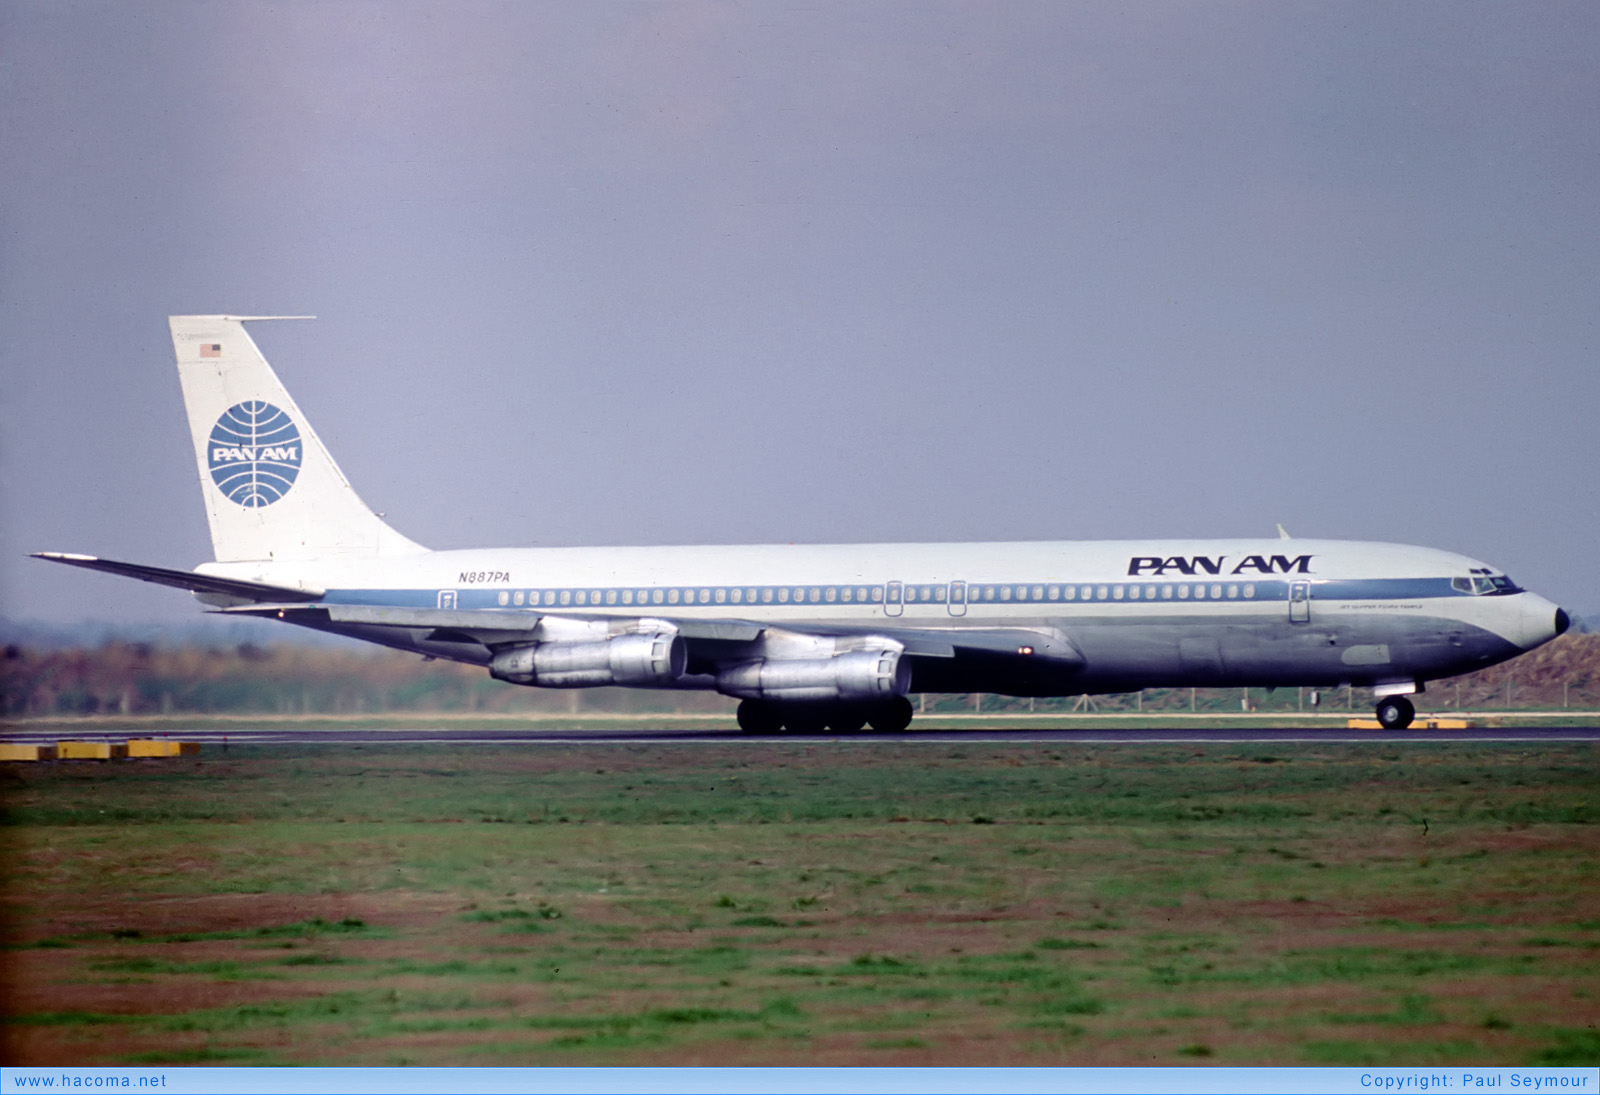 Photo of N887PA - Pan Am Clipper Flora Temple - London Heathrow Airport - Oct 18, 1976